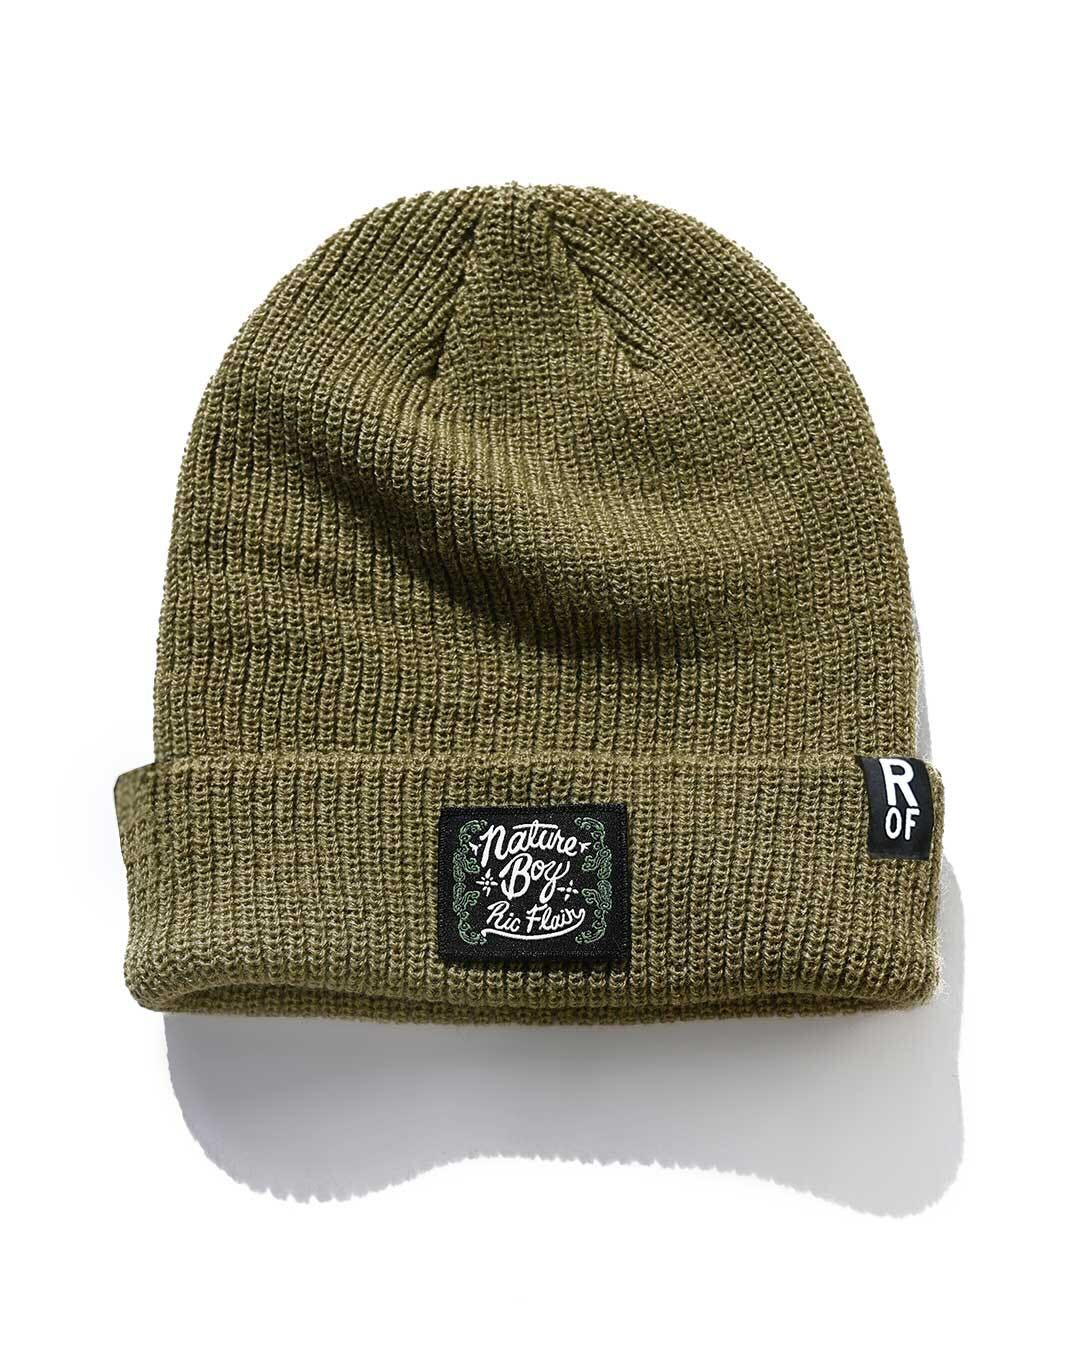 Ric Flair Nature Boy Olive Beanie - Roots of Fight Canada